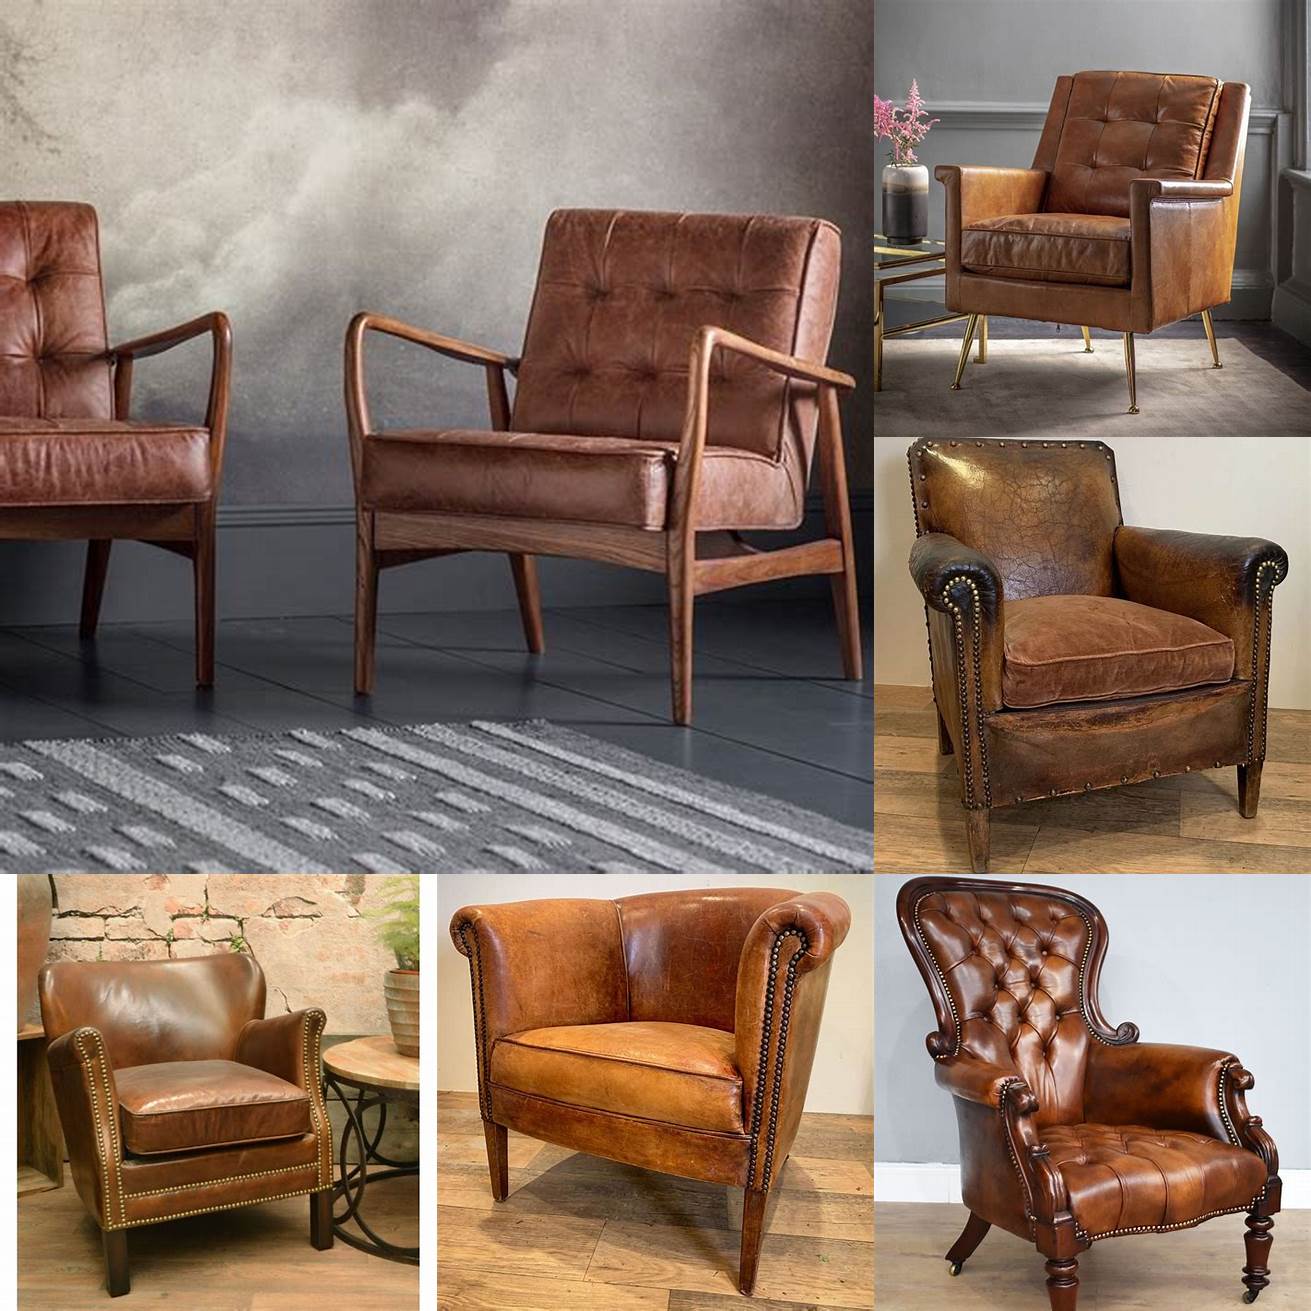 3 A leather armchair with a vintage feel featuring intricate stitching and a unique shape